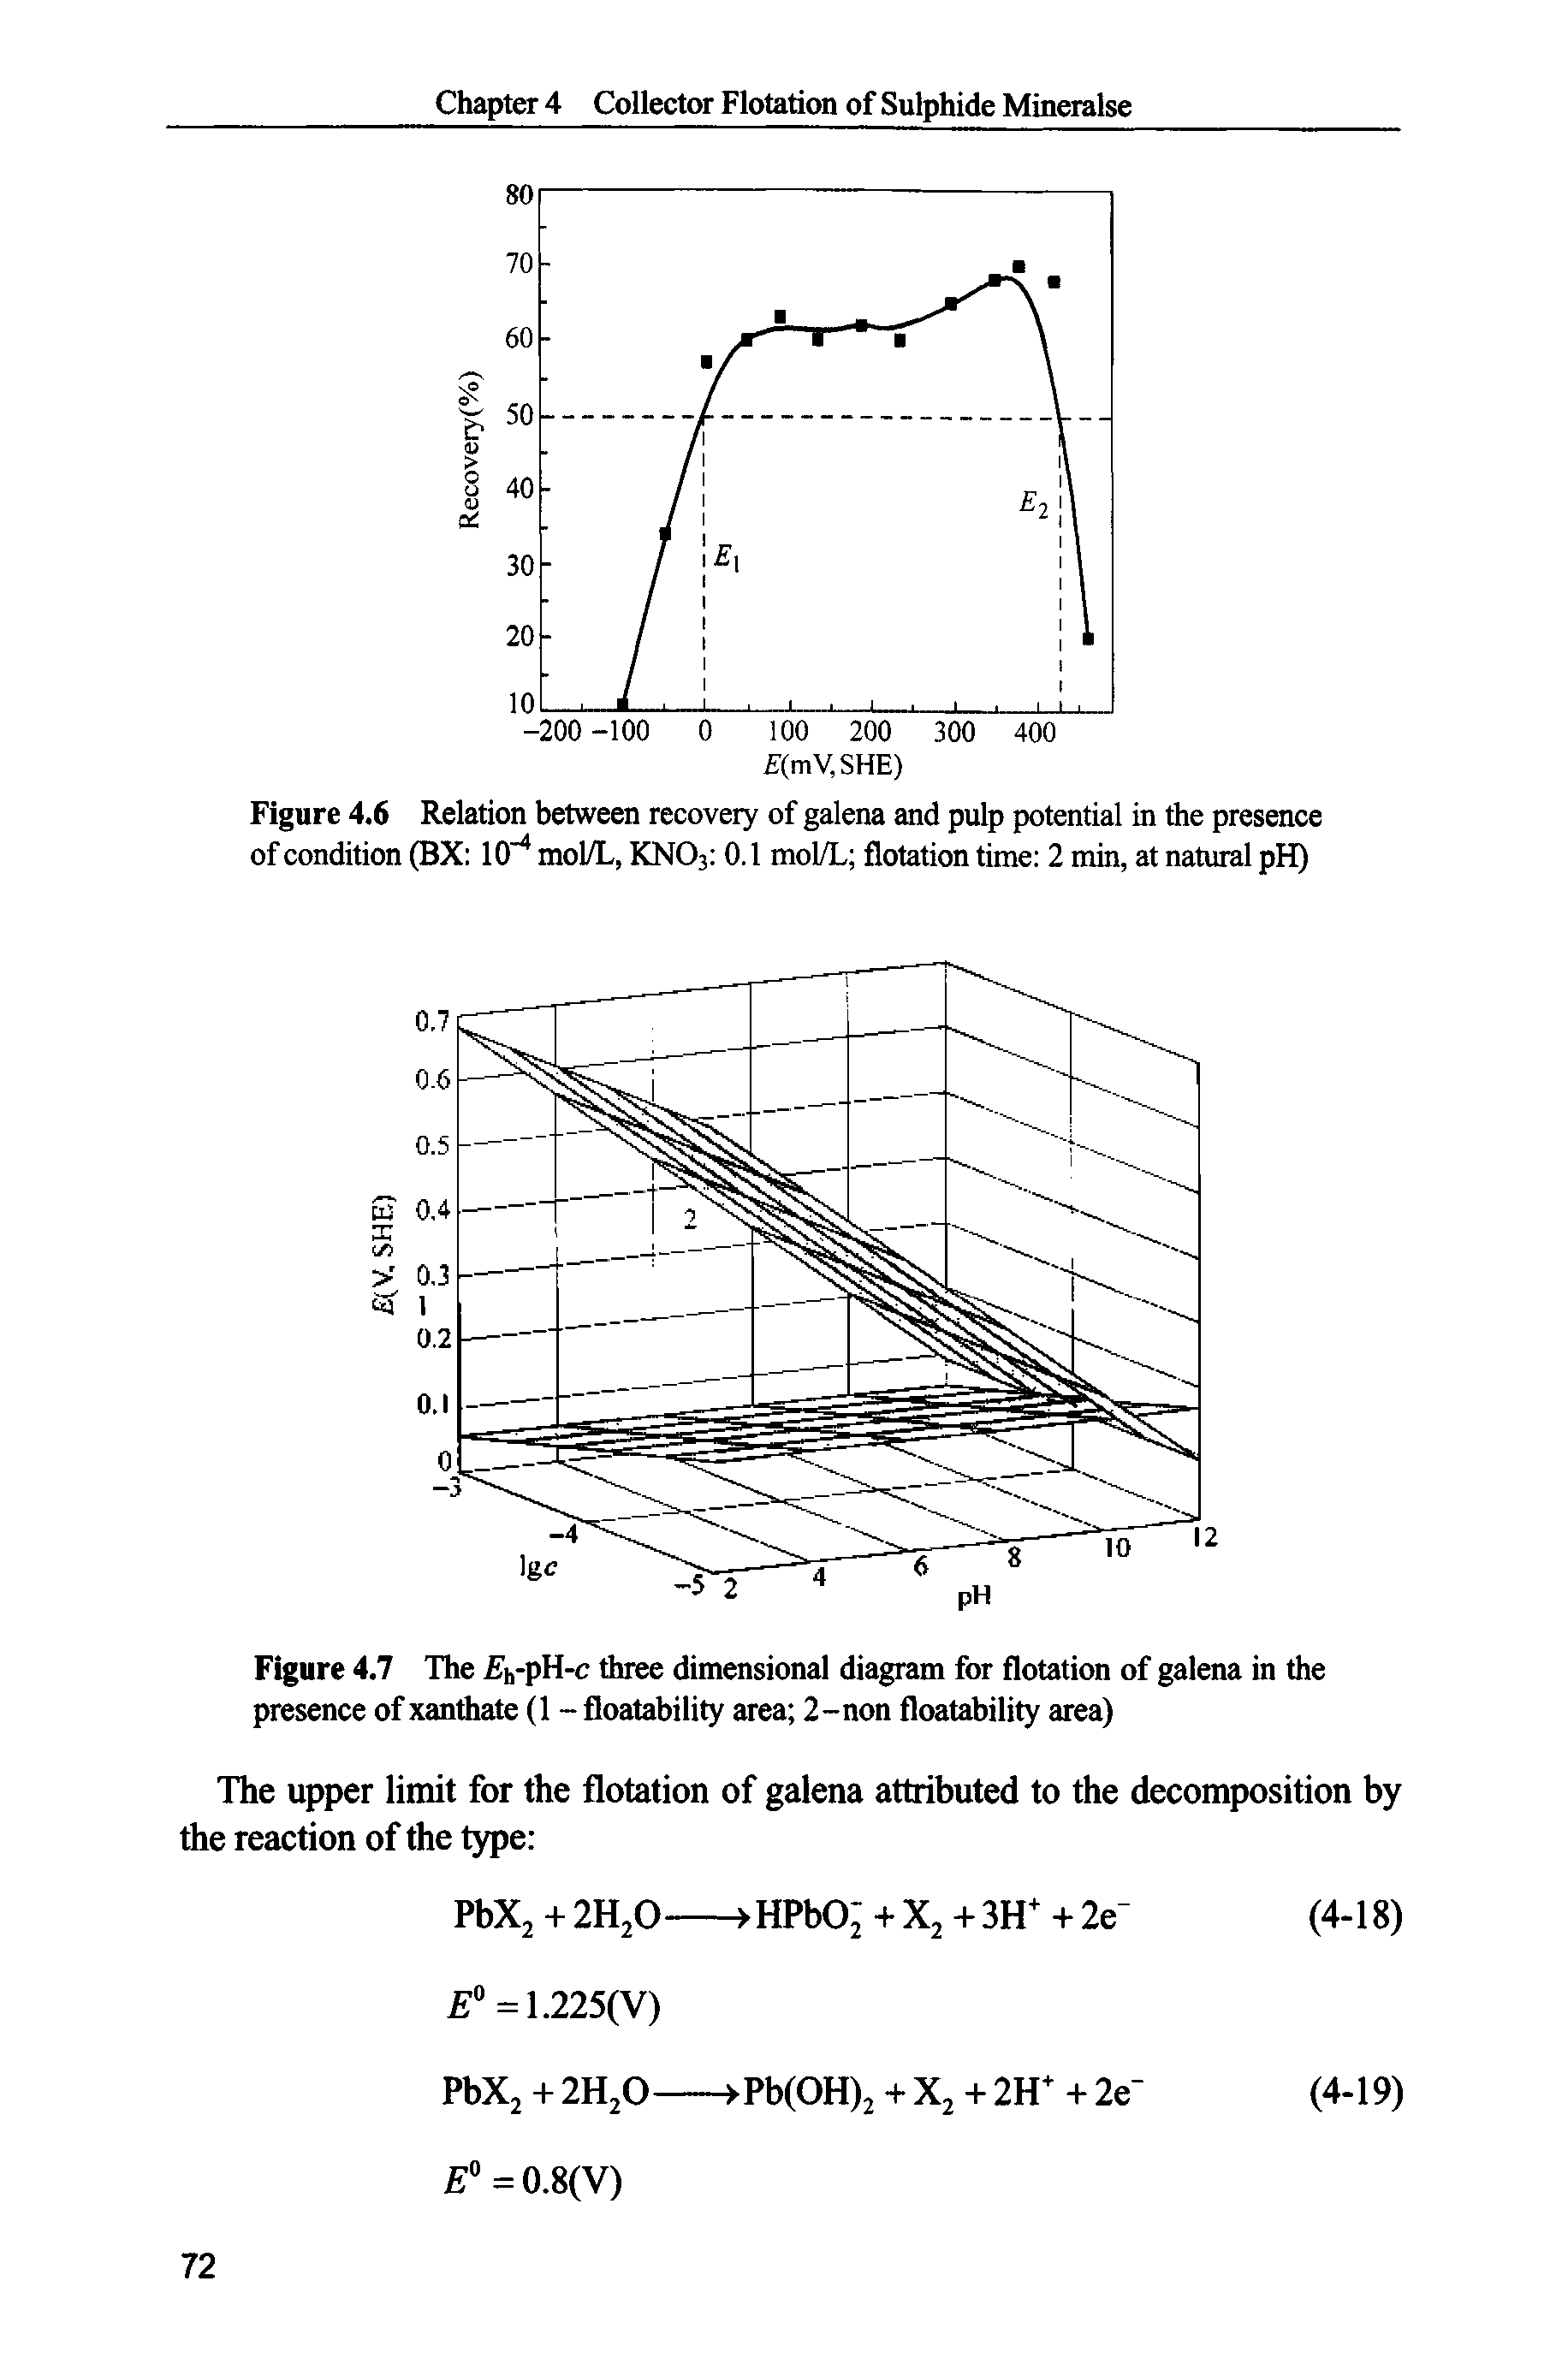 Figure 4,7 The h-pH-c three dimensional diagram for flotation of galena in the presence of xanthate (1 - floatability area 2-non floatability area)...